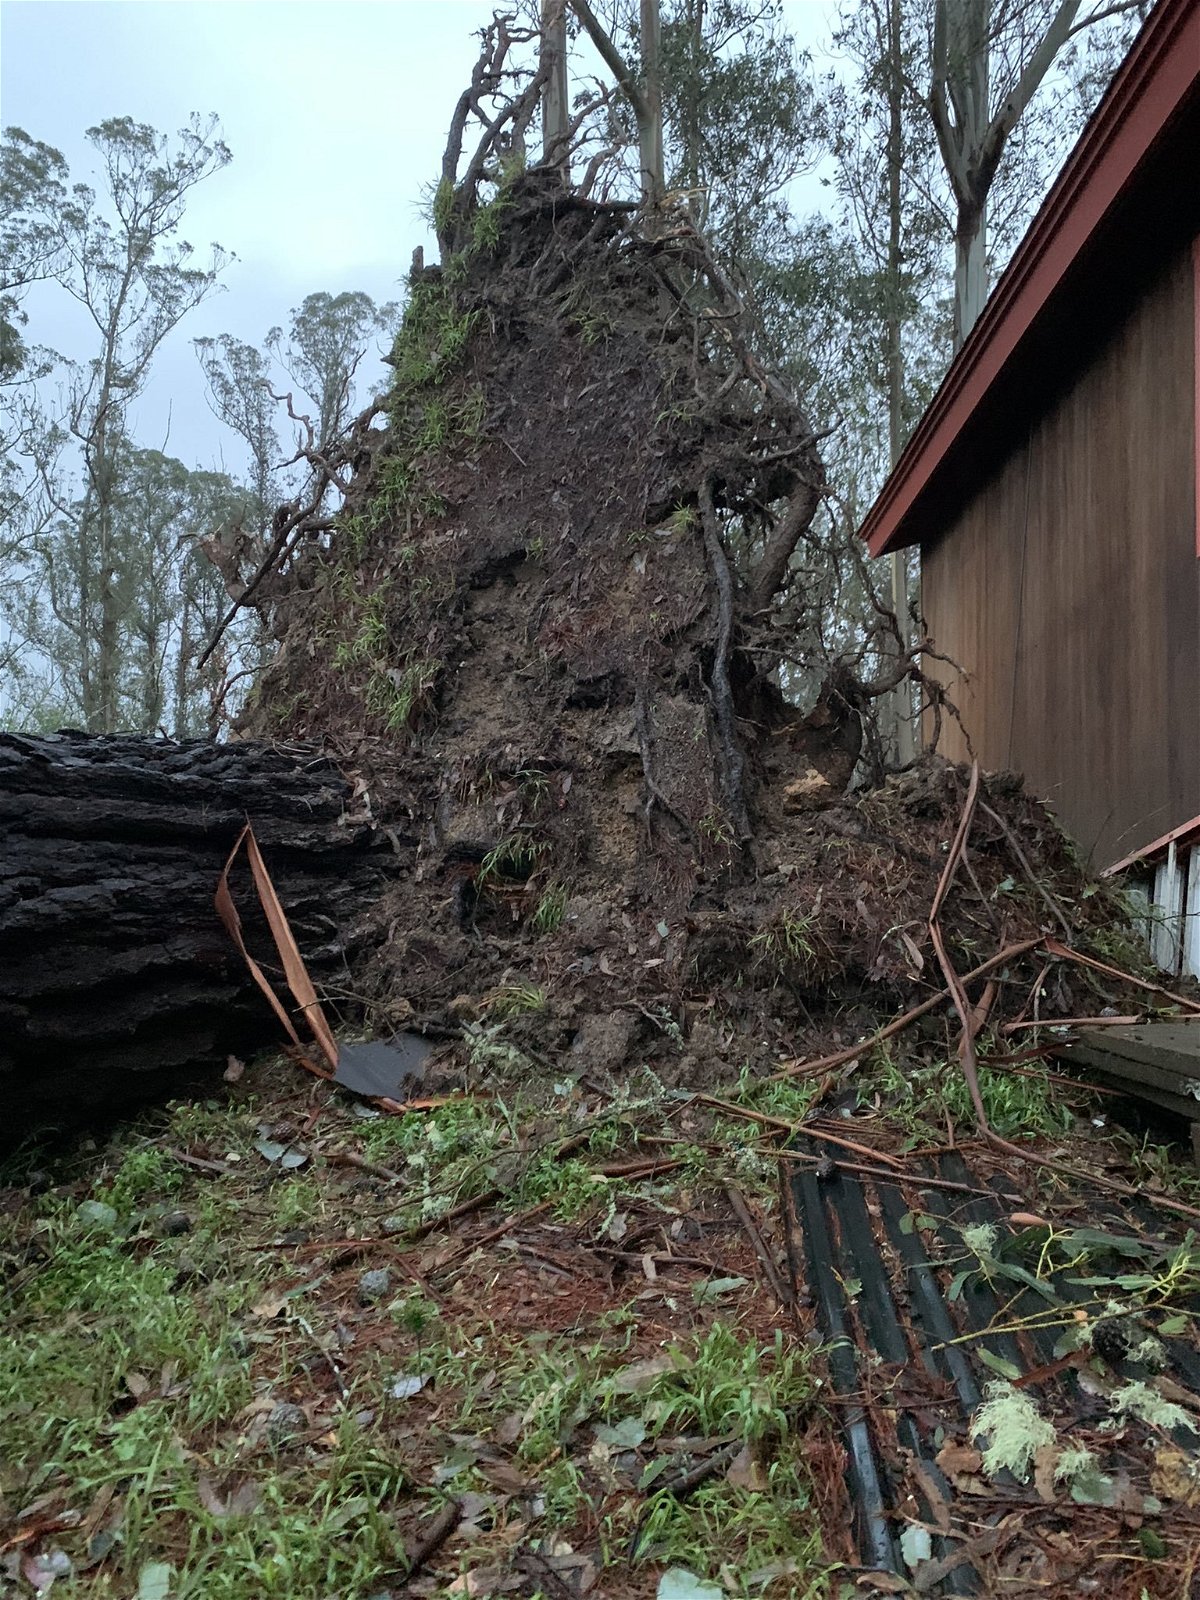 <i>Cal Fire CZU</i><br/>This image shows damaged a downed tree in the El Granada area of the San Mateo County.